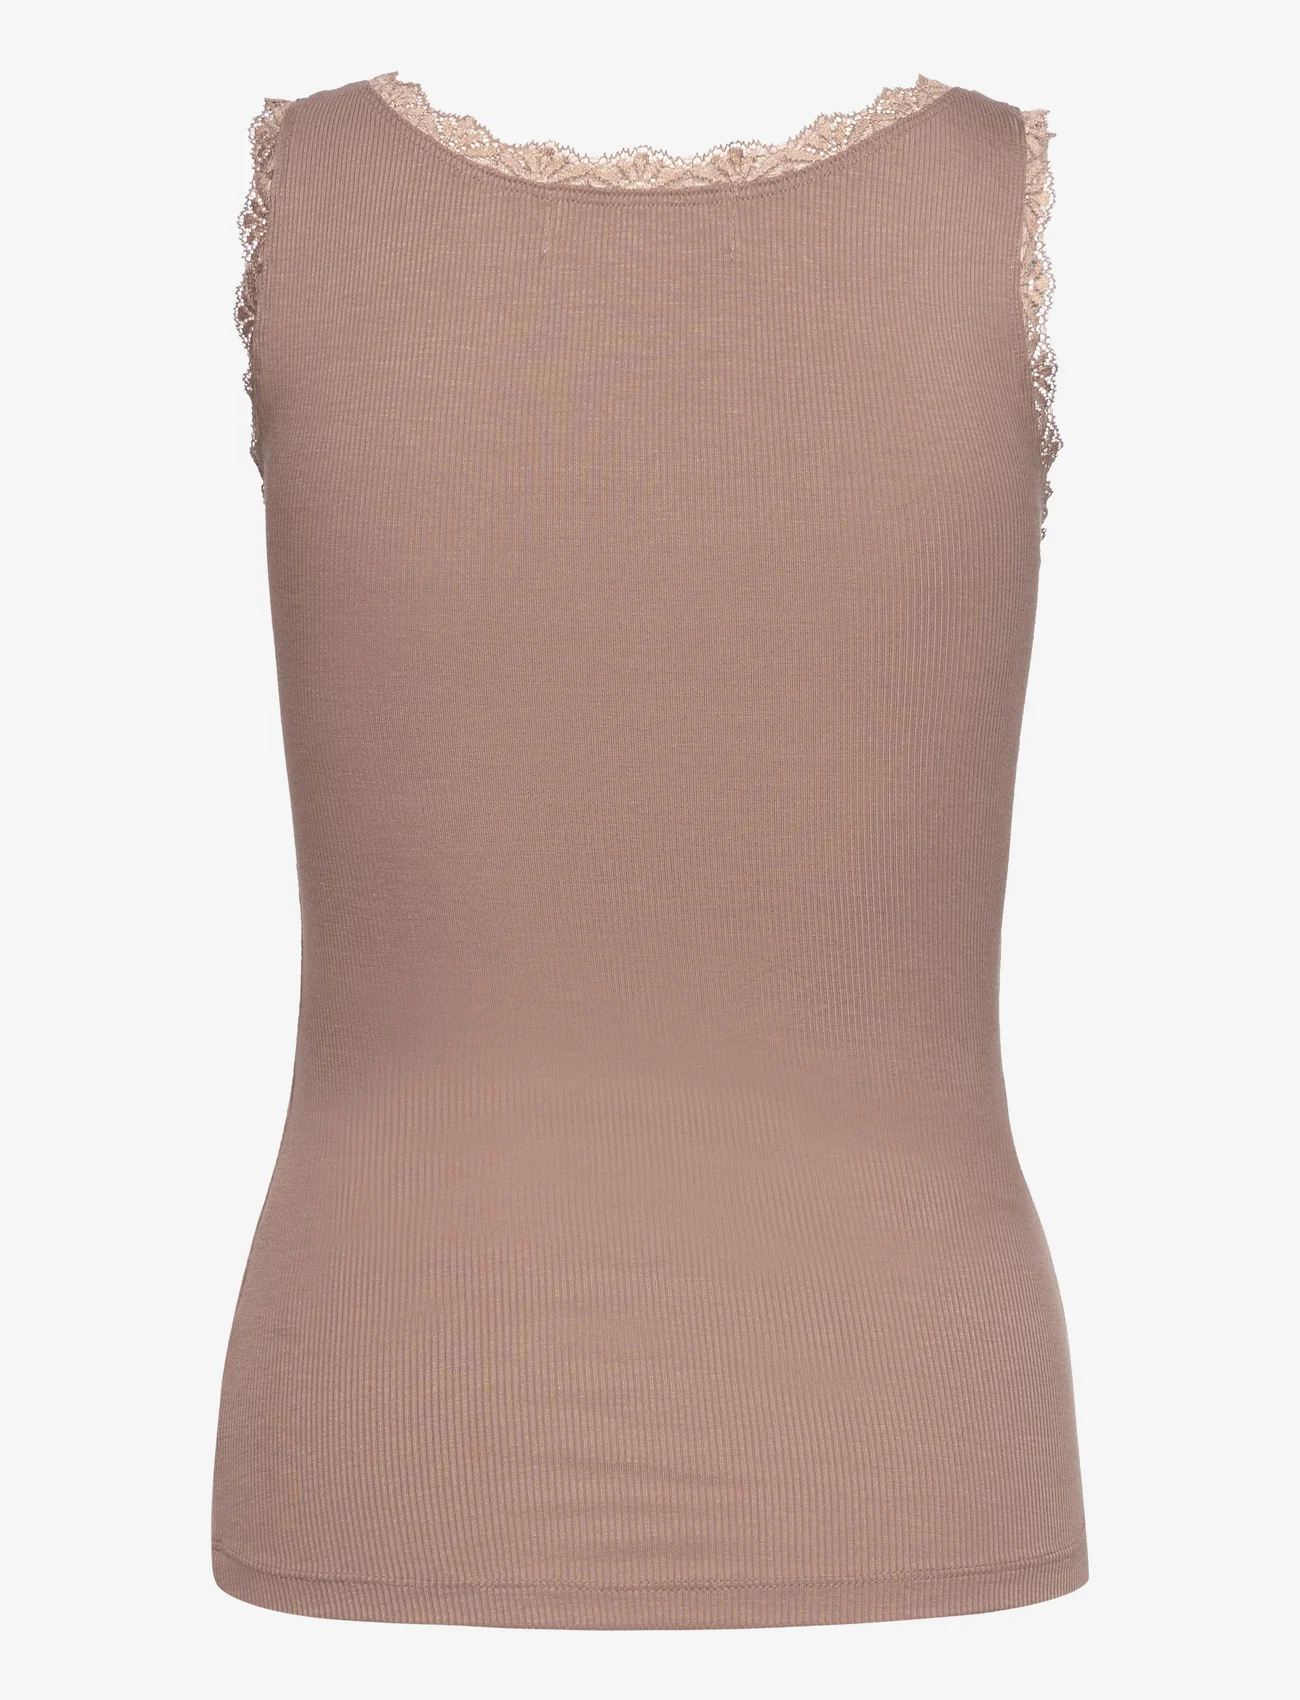 Sofie Schnoor - Top - lowest prices - brown - 1